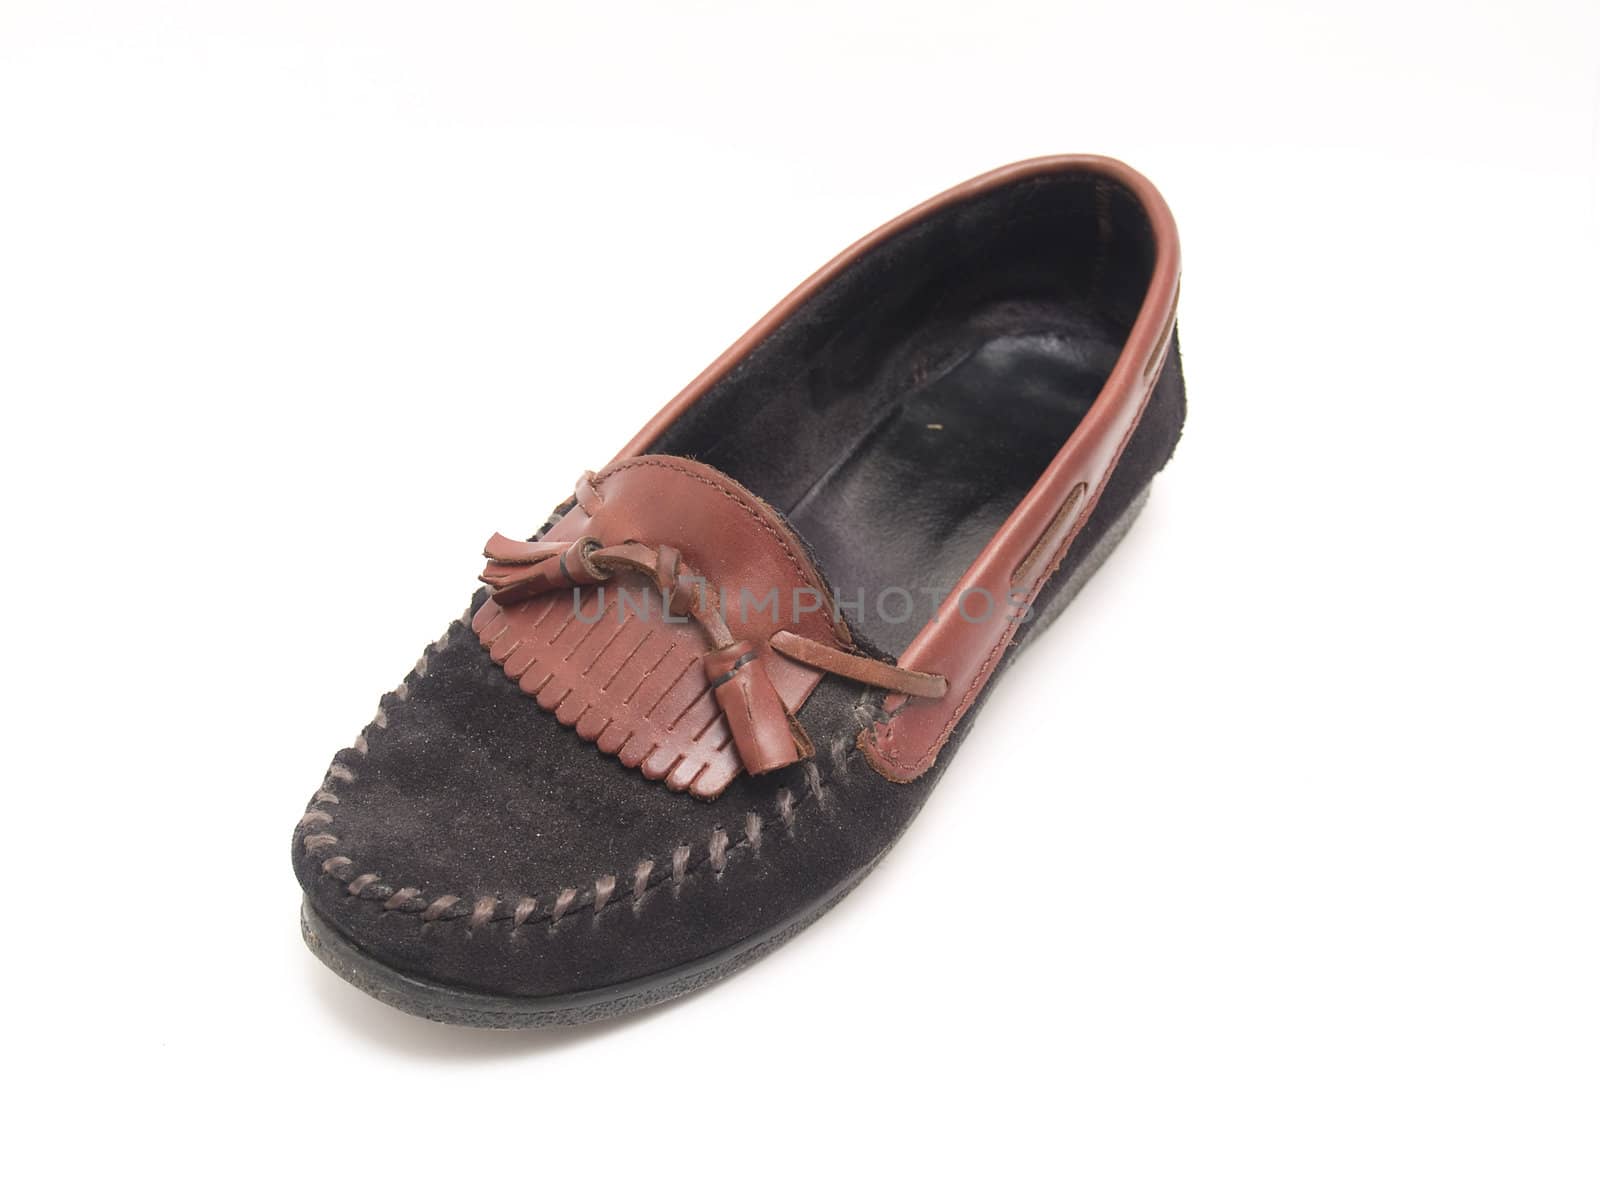 leather moccasins